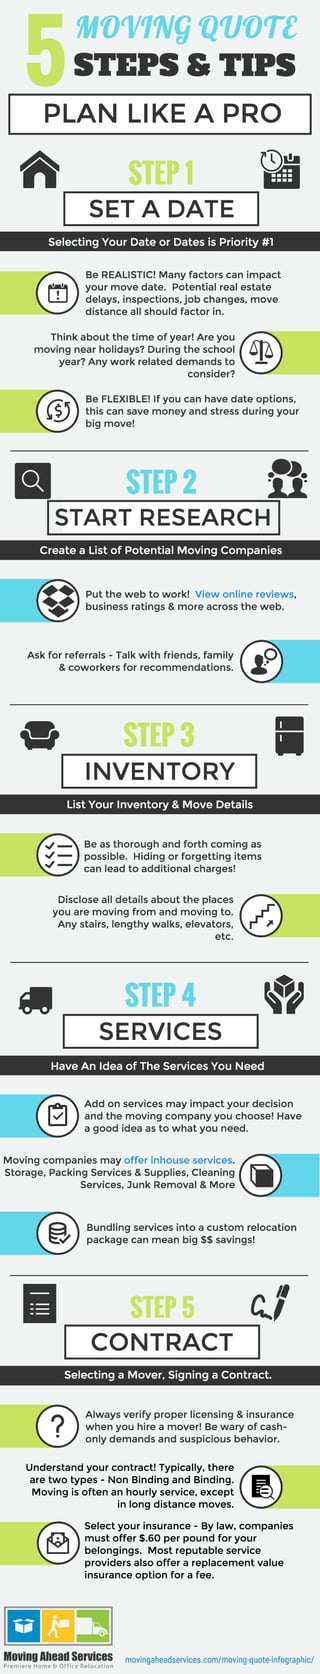 Moving quote infographic